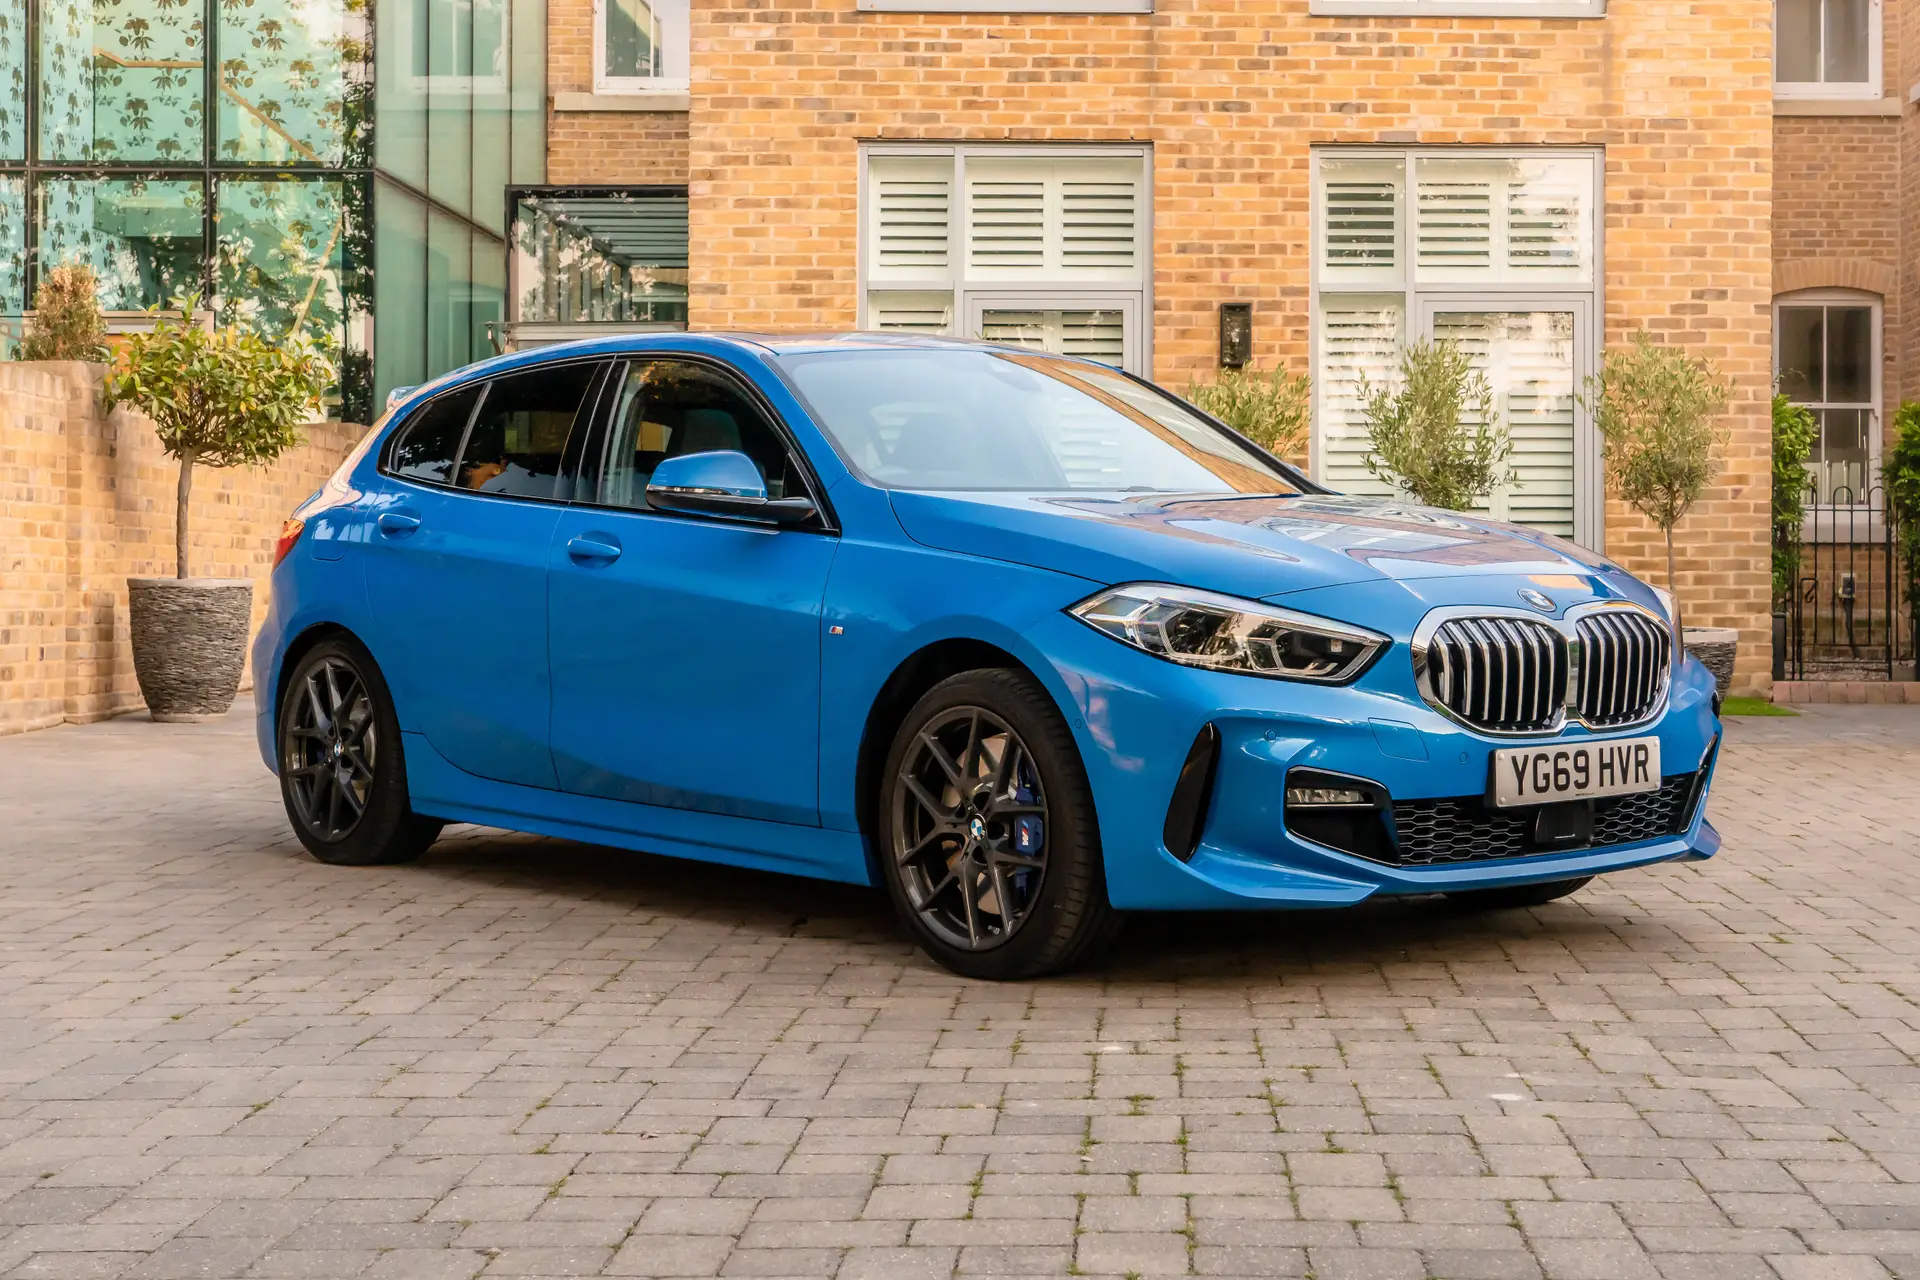 New BMW 1 Series Would Make a Great A-Class Rival - The Car Guide